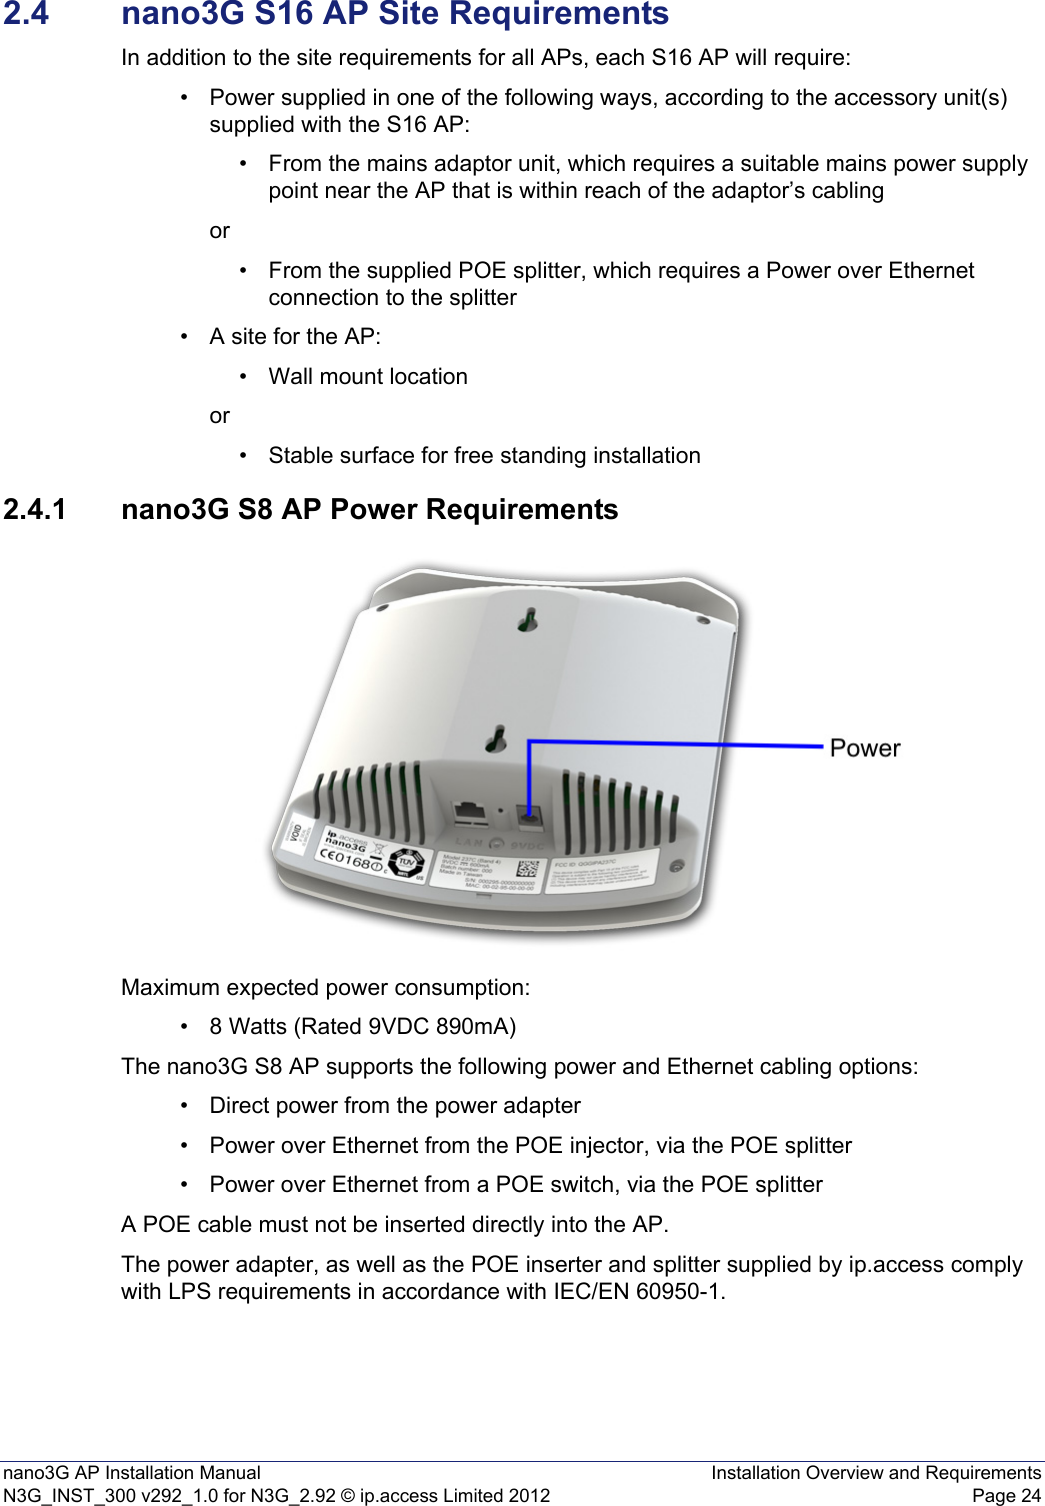 nano3G AP Installation Manual Installation Overview and RequirementsN3G_INST_300 v292_1.0 for N3G_2.92 © ip.access Limited 2012 Page 242.4 nano3G S16 AP Site RequirementsIn addition to the site requirements for all APs, each S16 AP will require:• Power supplied in one of the following ways, according to the accessory unit(s) supplied with the S16 AP:• From the mains adaptor unit, which requires a suitable mains power supply point near the AP that is within reach of the adaptor’s cablingor• From the supplied POE splitter, which requires a Power over Ethernet connection to the splitter • A site for the AP:• Wall mount locationor• Stable surface for free standing installation 2.4.1 nano3G S8 AP Power RequirementsMaximum expected power consumption:• 8 Watts (Rated 9VDC 890mA)The nano3G S8 AP supports the following power and Ethernet cabling options:• Direct power from the power adapter• Power over Ethernet from the POE injector, via the POE splitter• Power over Ethernet from a POE switch, via the POE splitterA POE cable must not be inserted directly into the AP.The power adapter, as well as the POE inserter and splitter supplied by ip.access comply with LPS requirements in accordance with IEC/EN 60950-1.